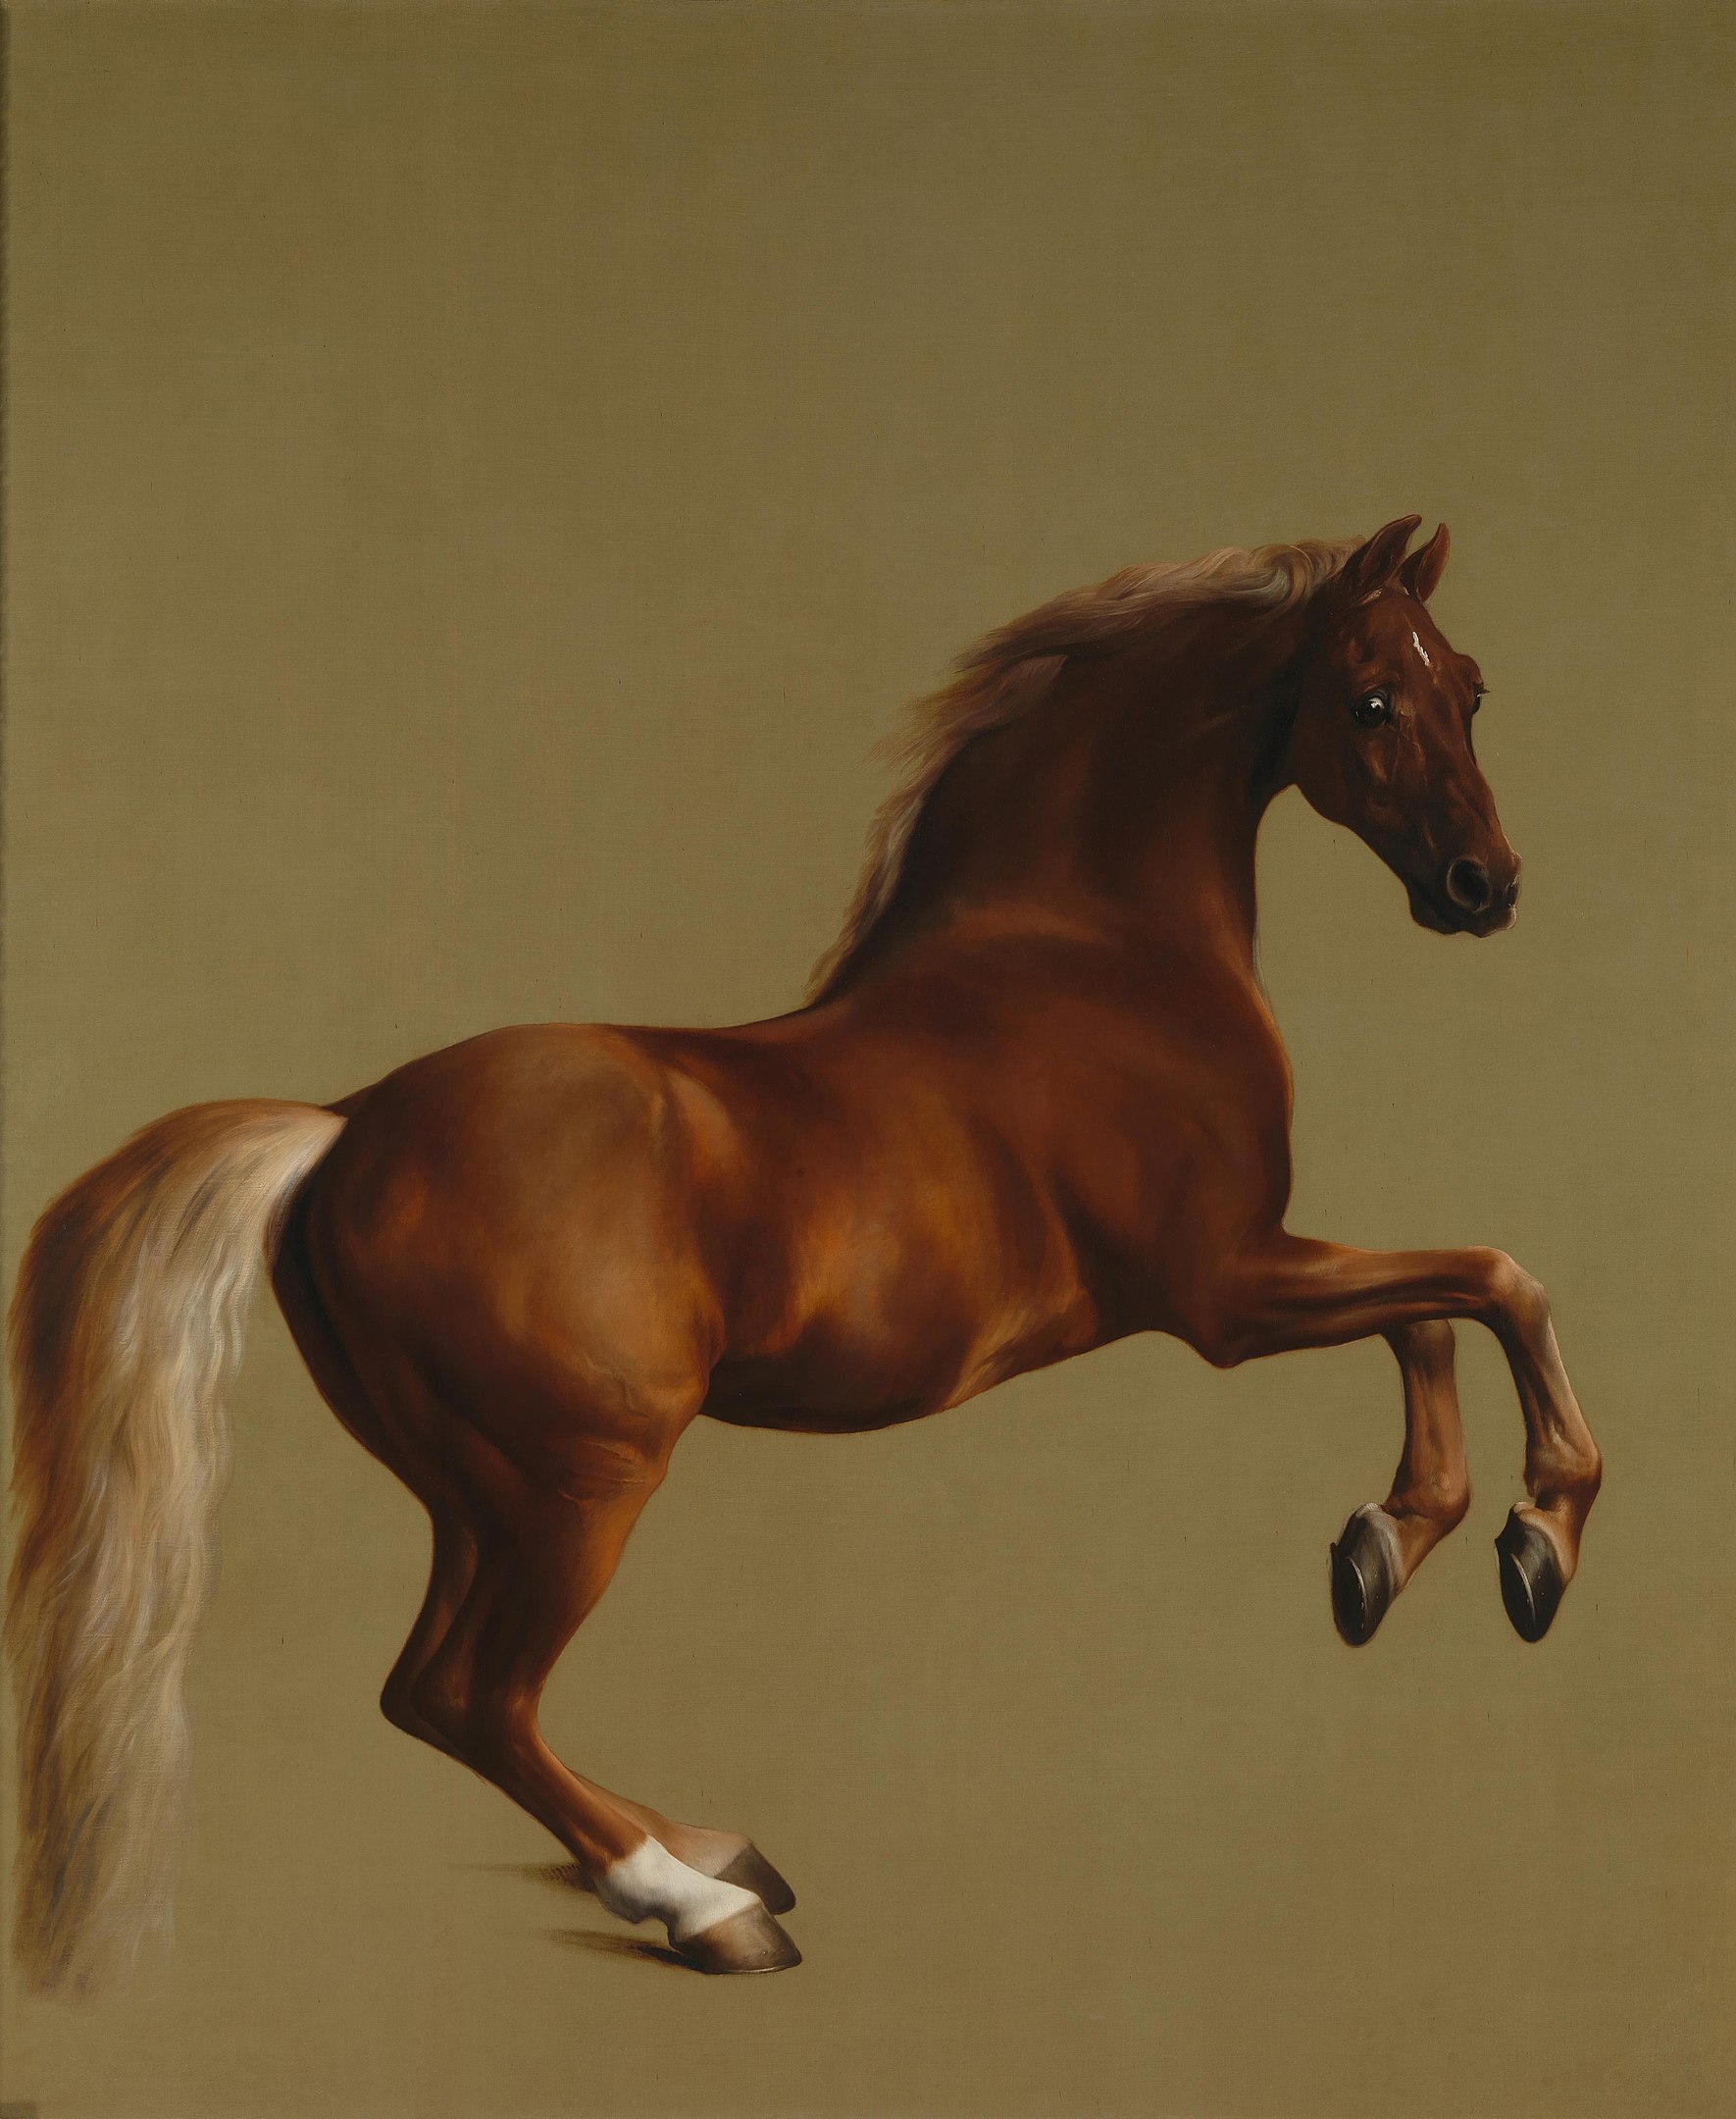 A side portrait of a horse with its front legs lifted.